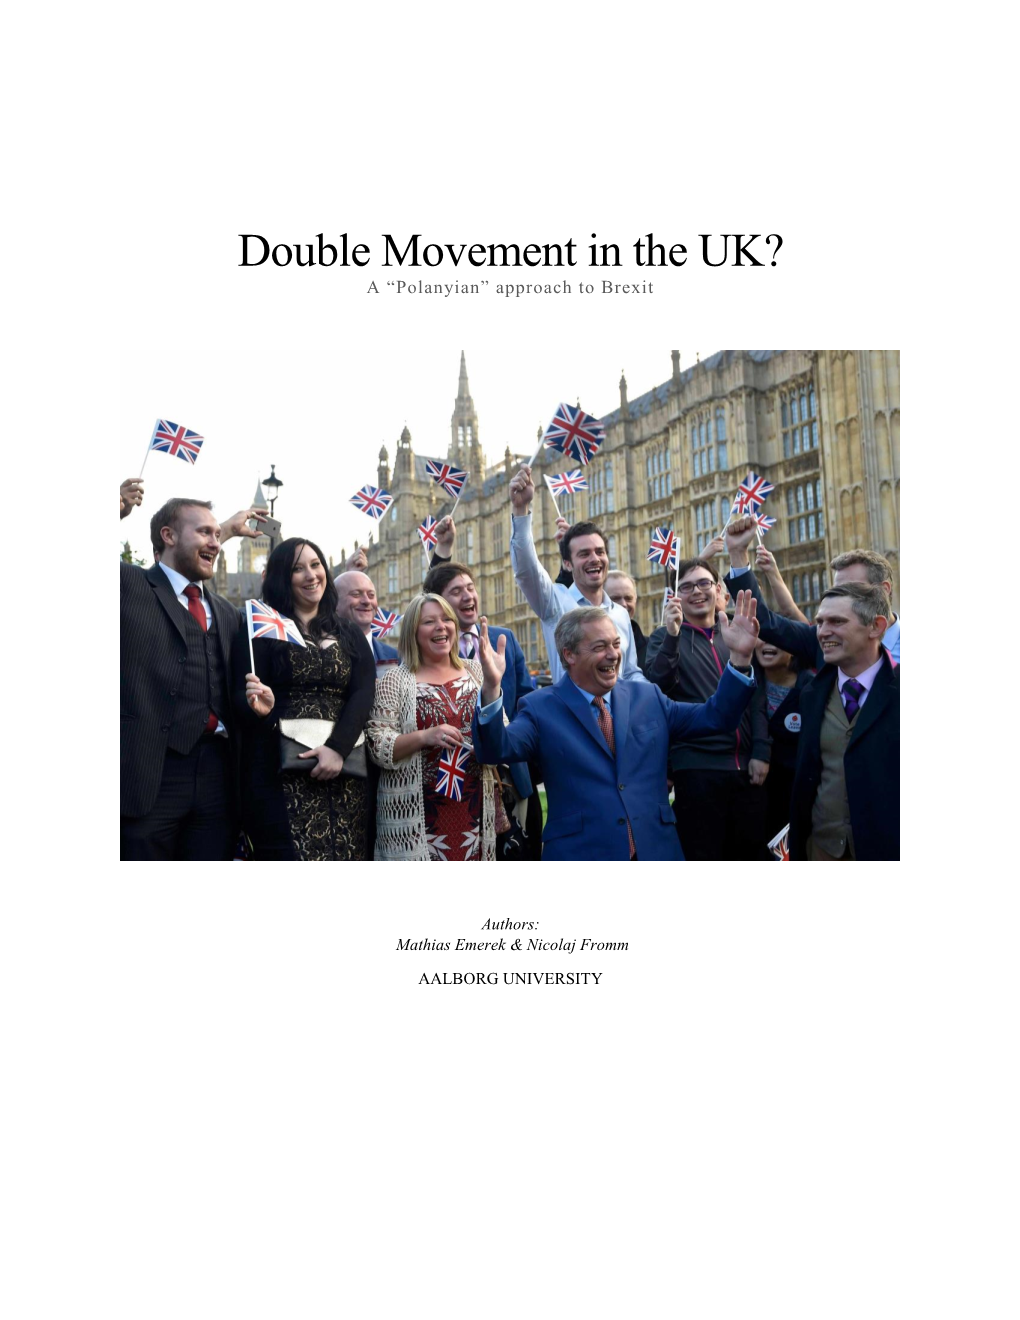 Double Movement in the UK? a “Polanyian” Approach to Brexit